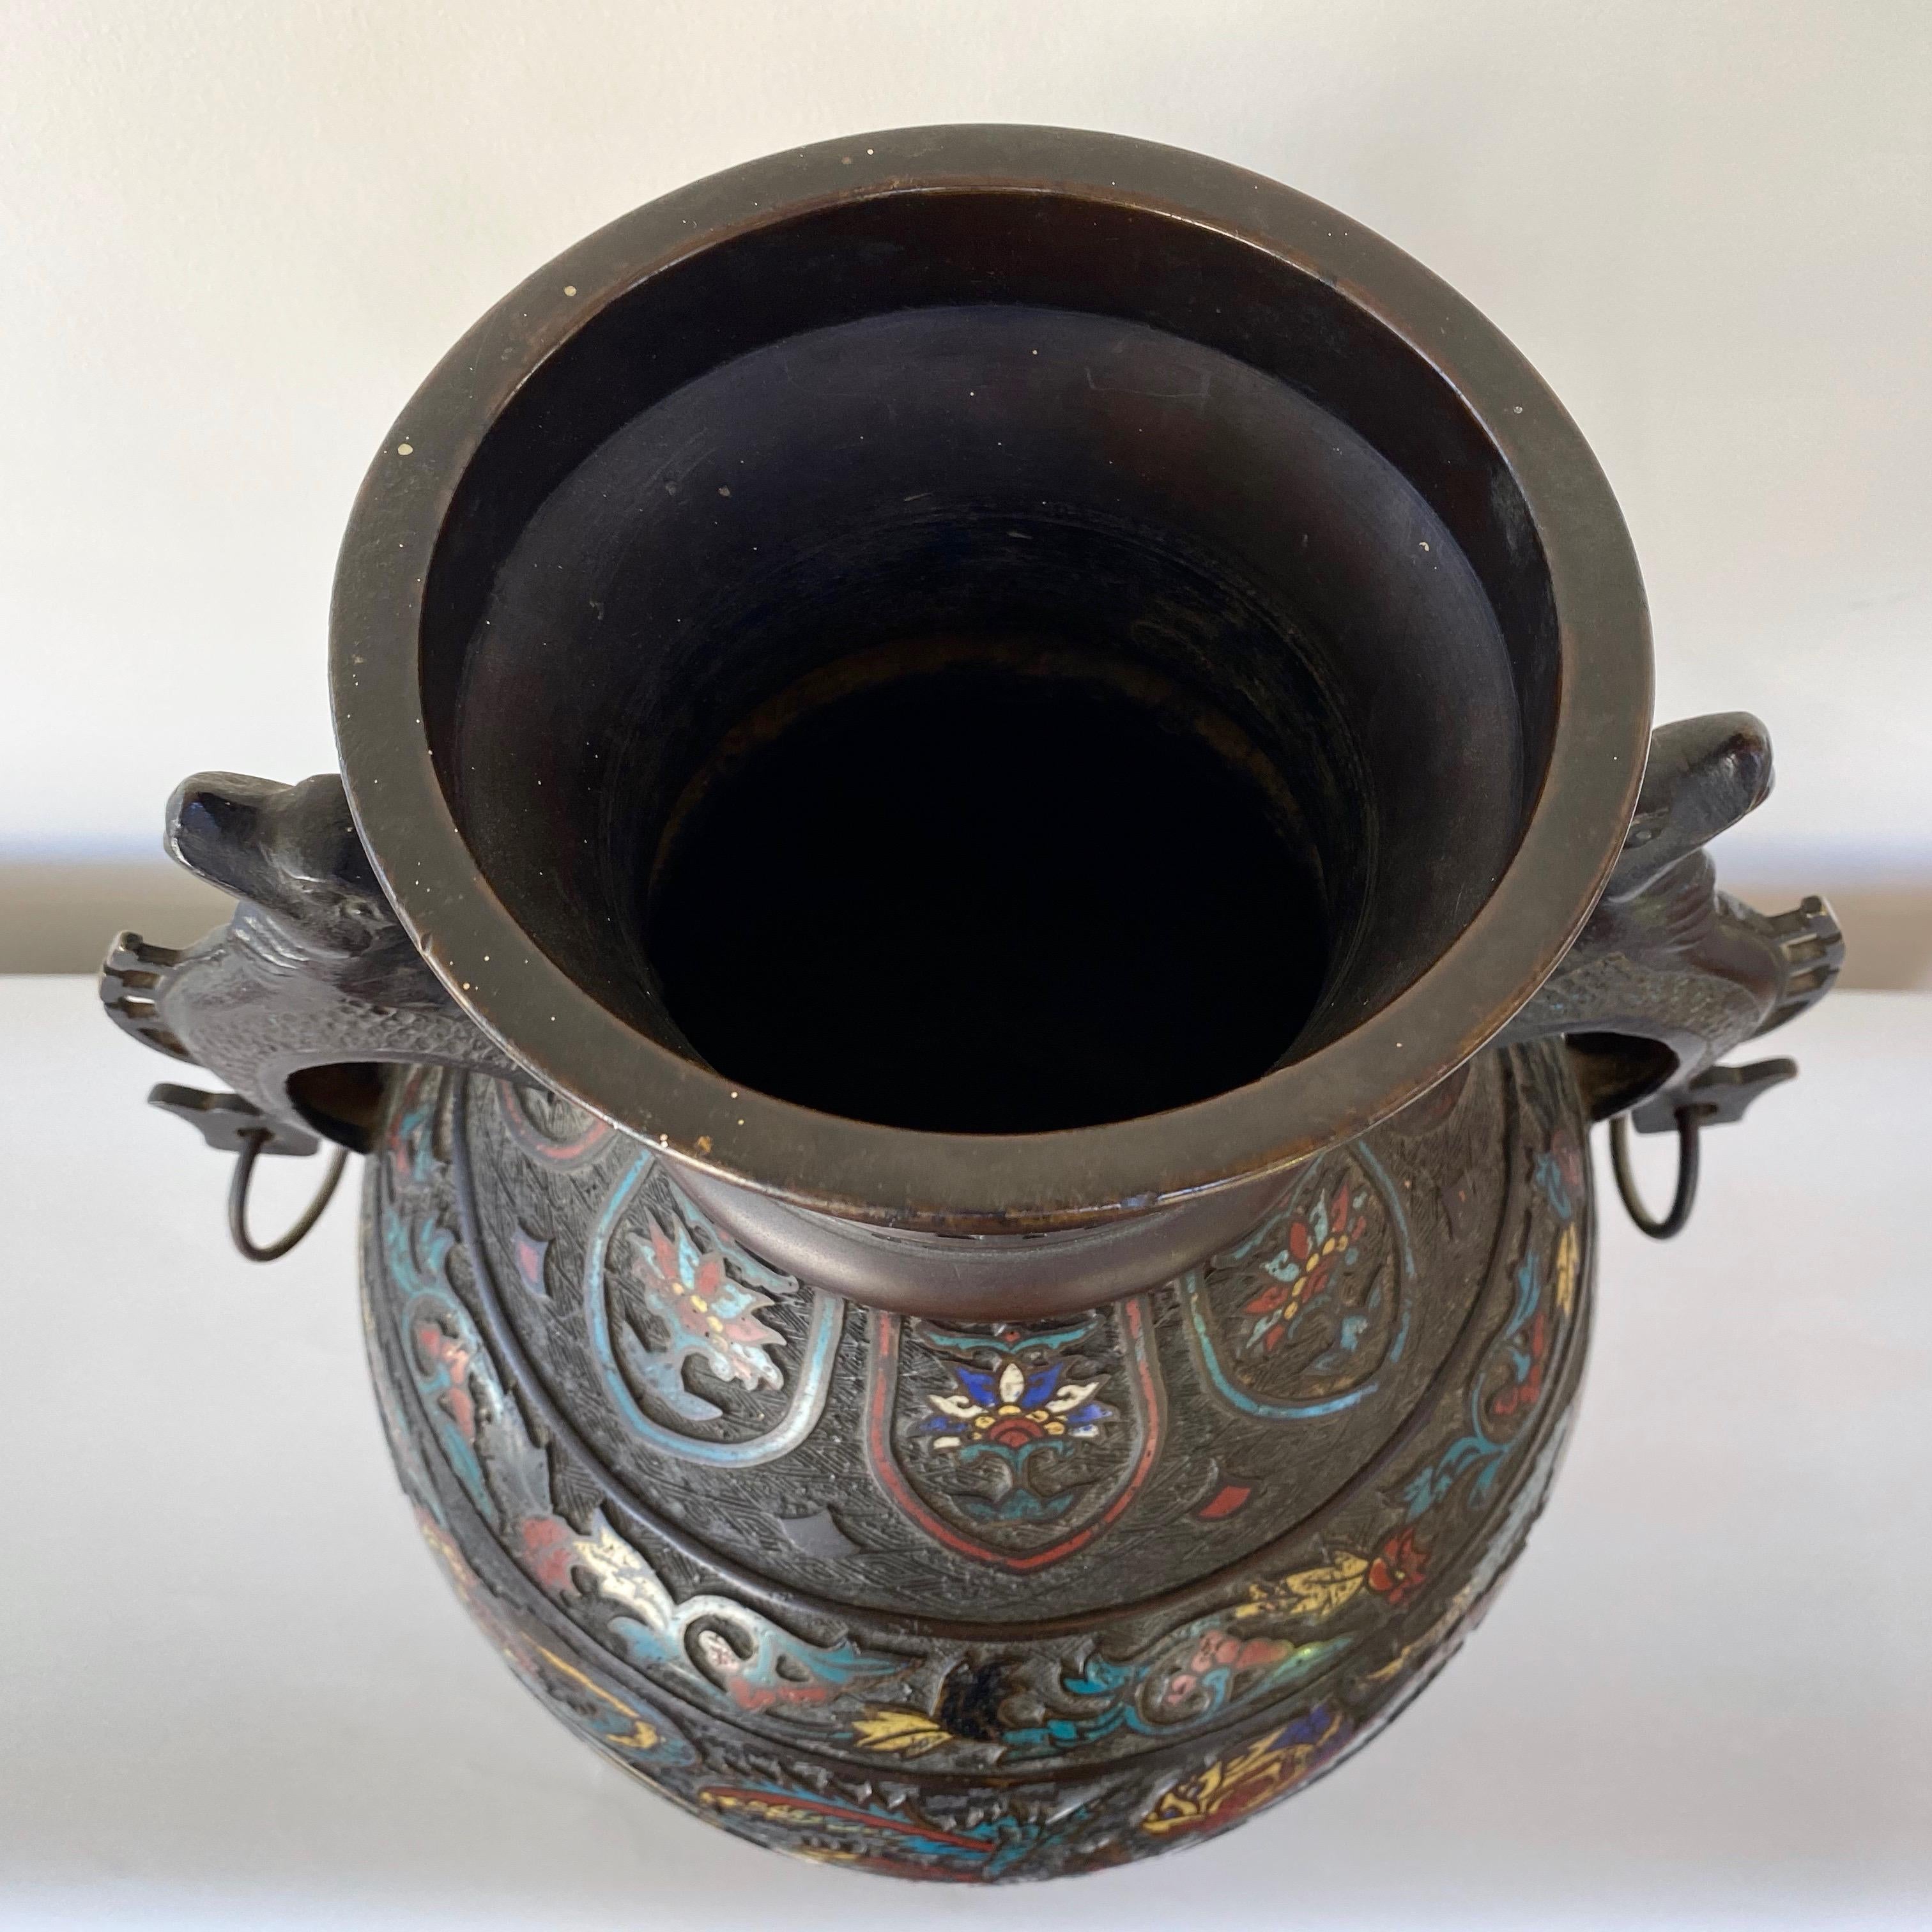 Large Chinese Qing Dynasty Bronze Cloisonné Urn with Dragon Handles, 19th C. 14